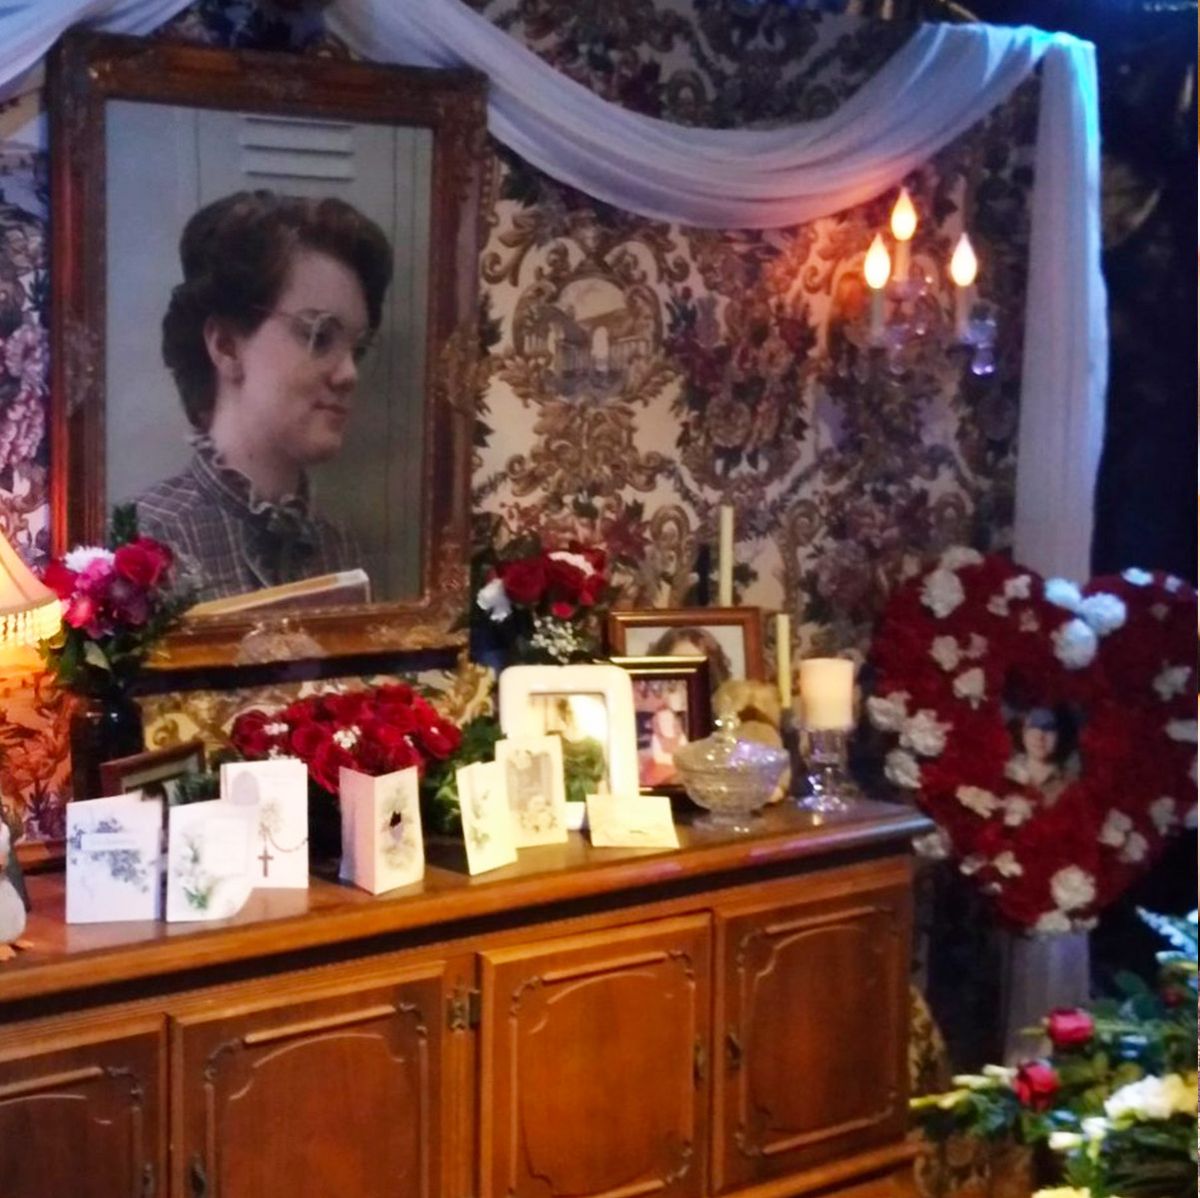 Stranger Things' Fans Can Visit a Justice for Barb Shrine at